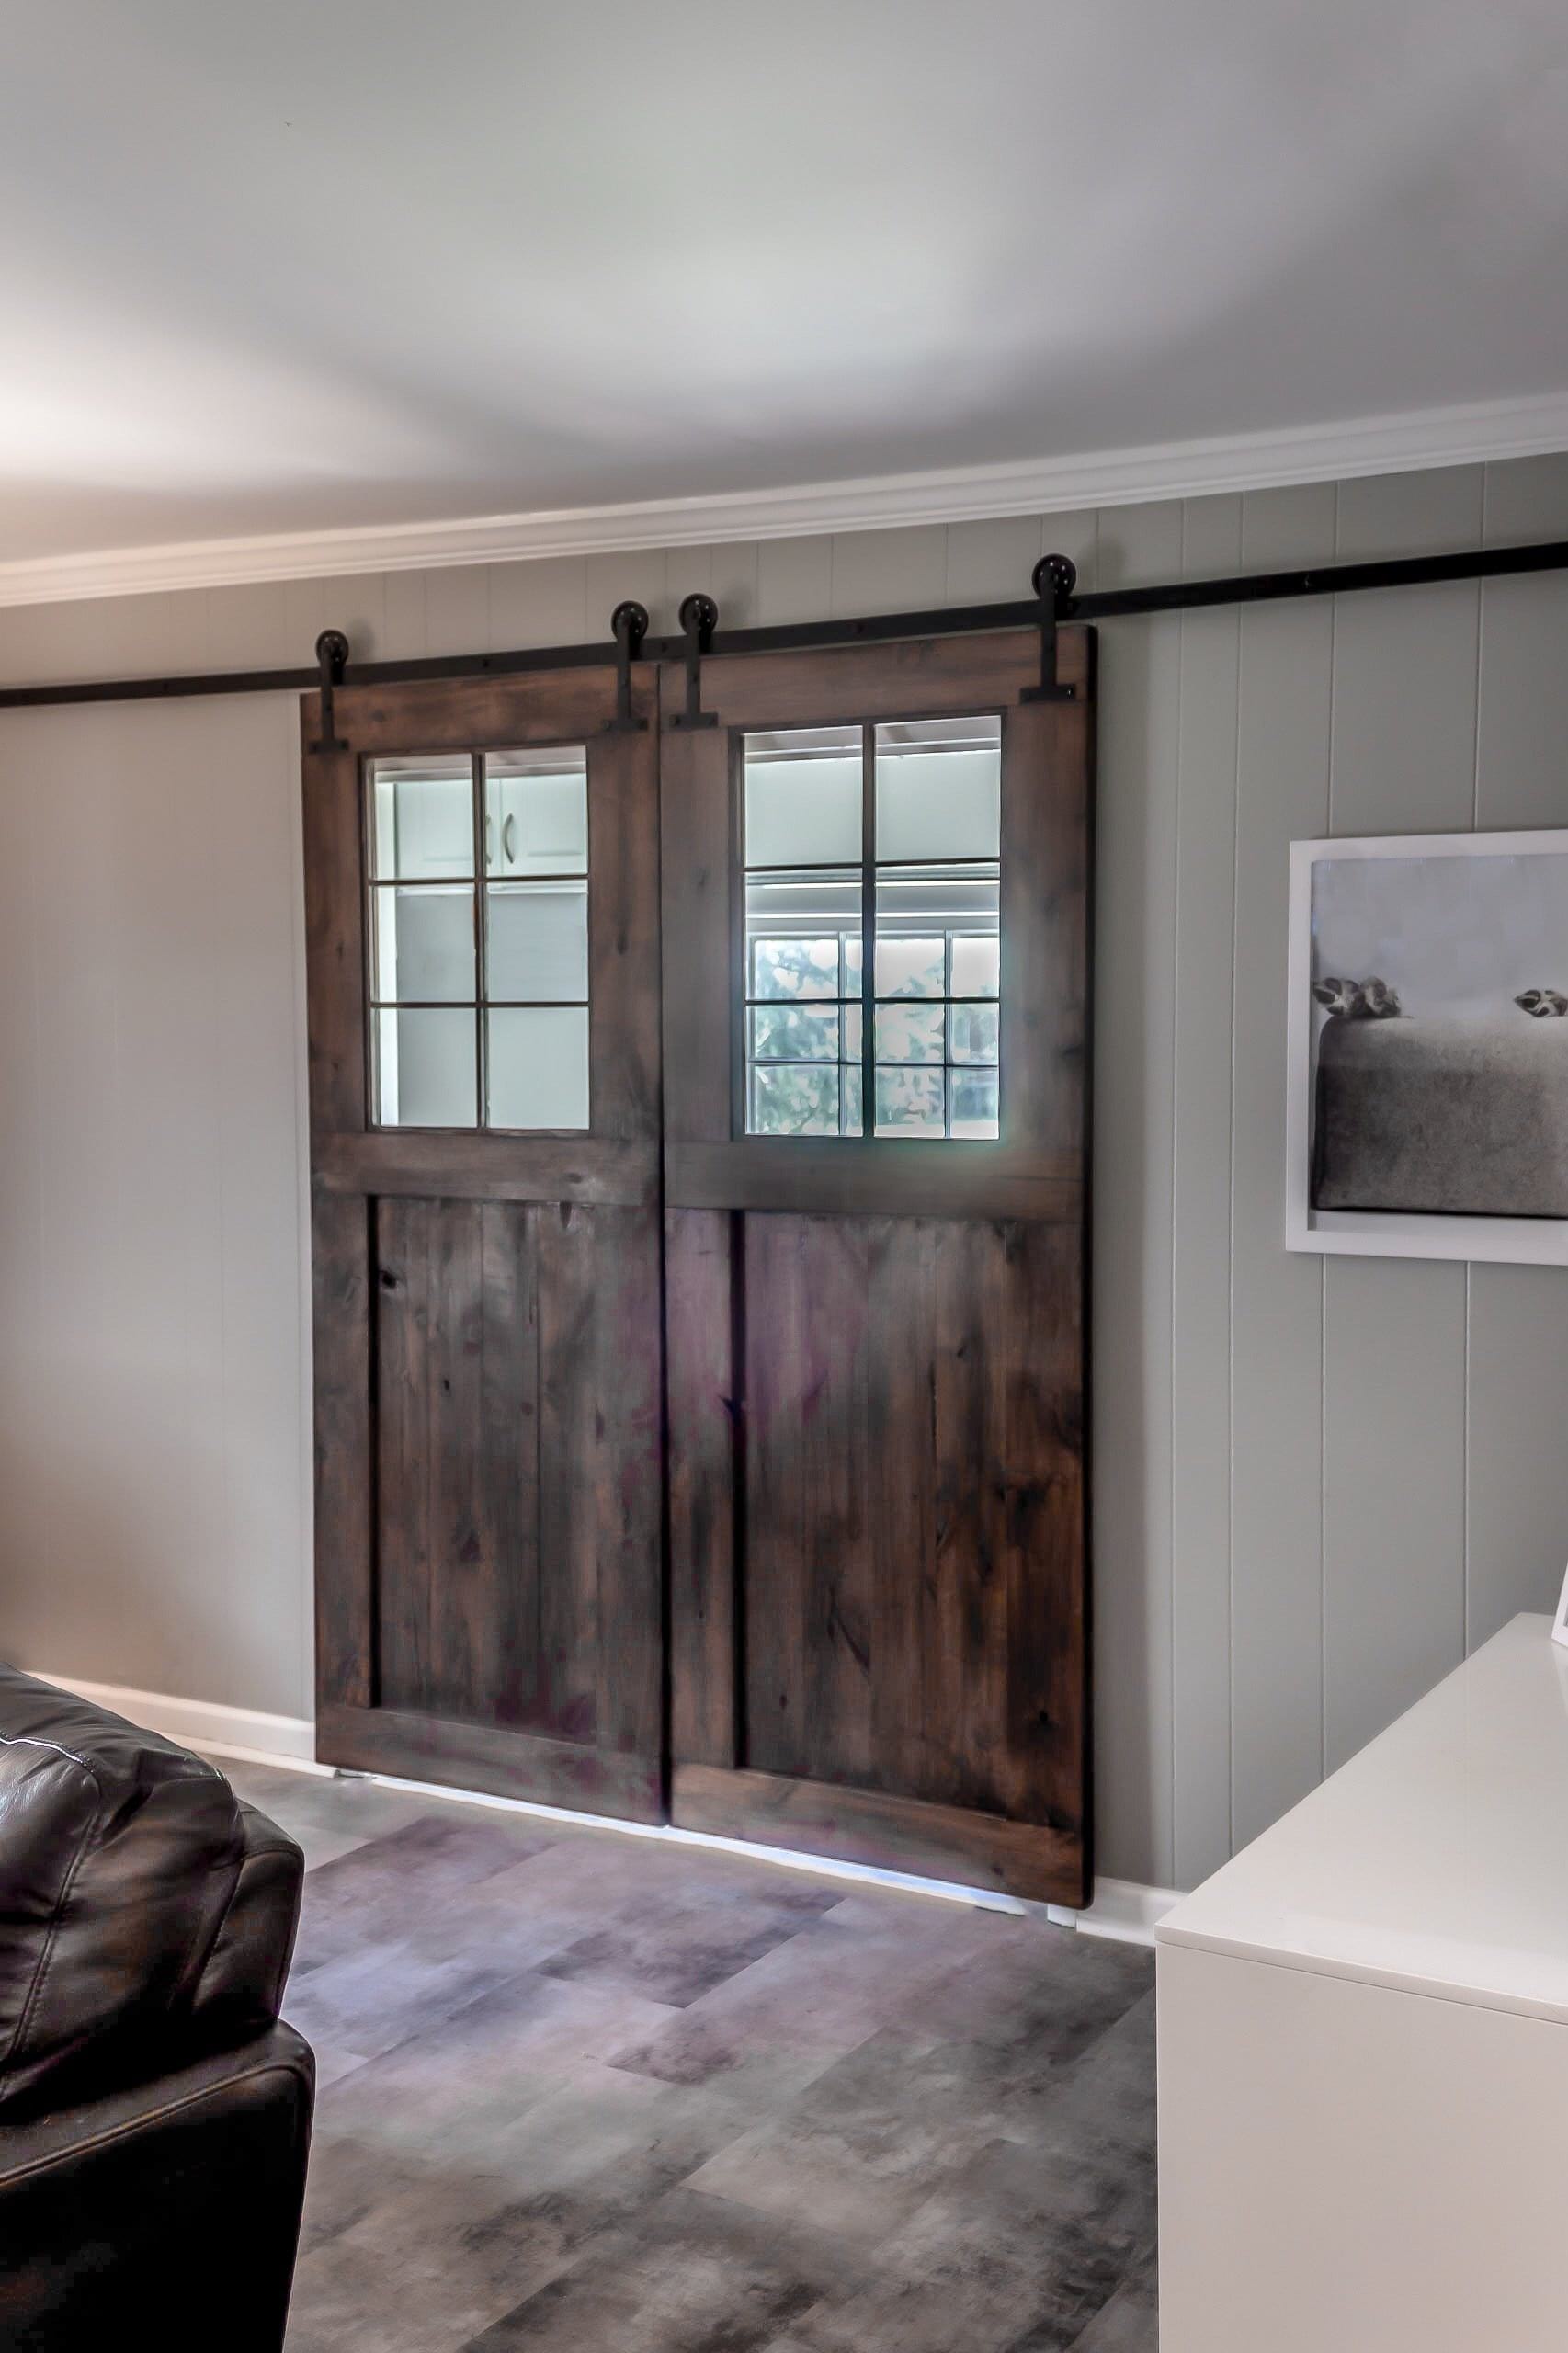 No. 248 - The Sliding Barn Door With a Window 